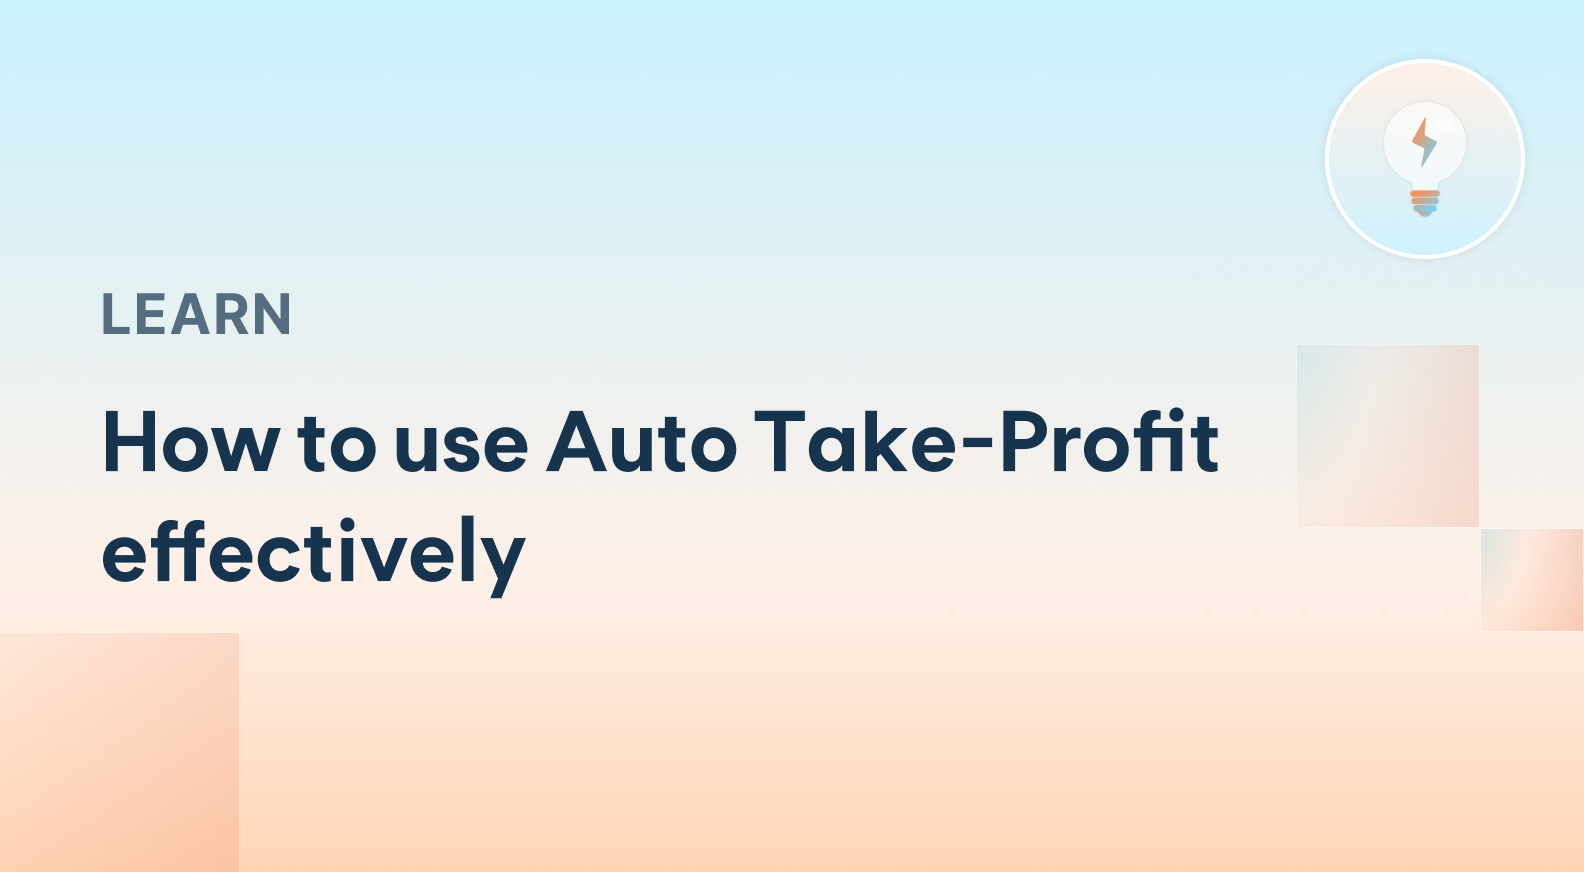 How to use Auto Take-Profit effectively